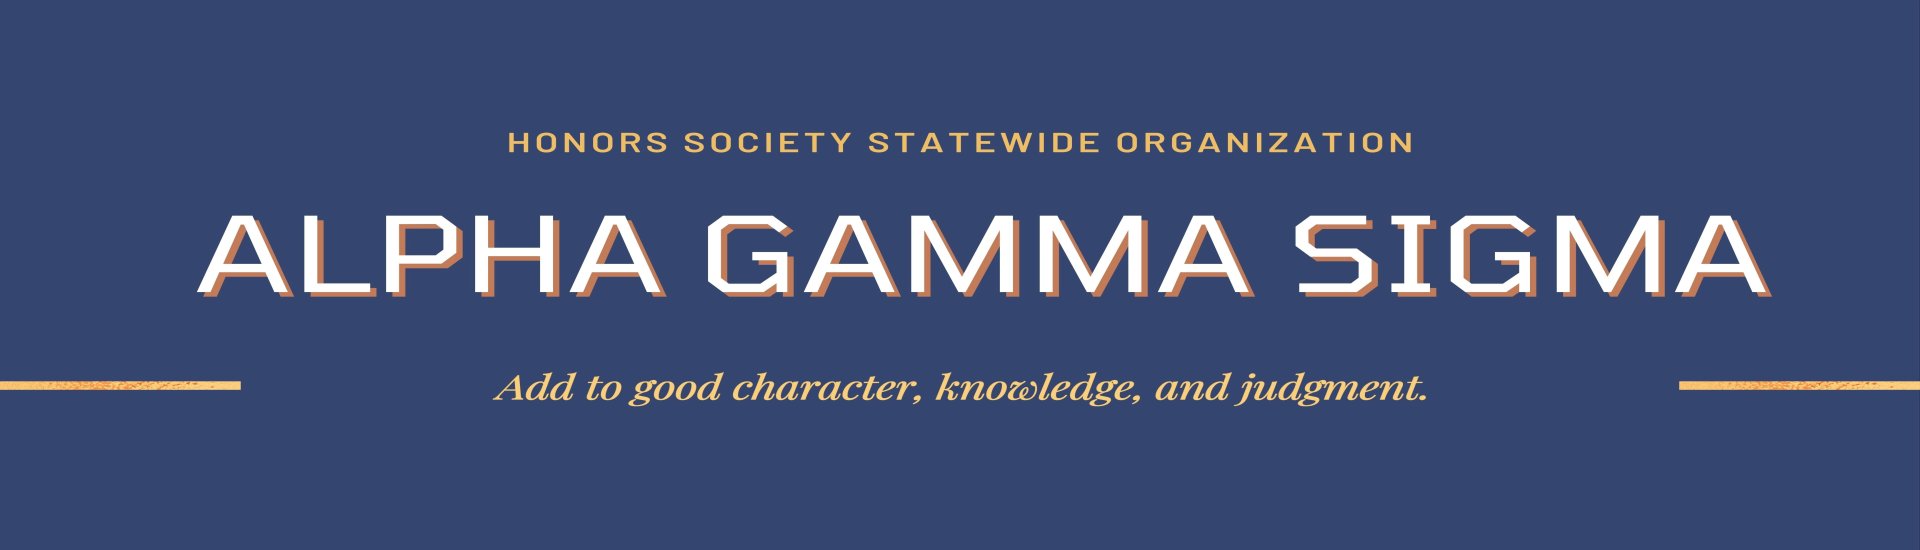 Honors Society Statewide Organization Alpha Gamma Sigma: add to good character, knowledge and judgement